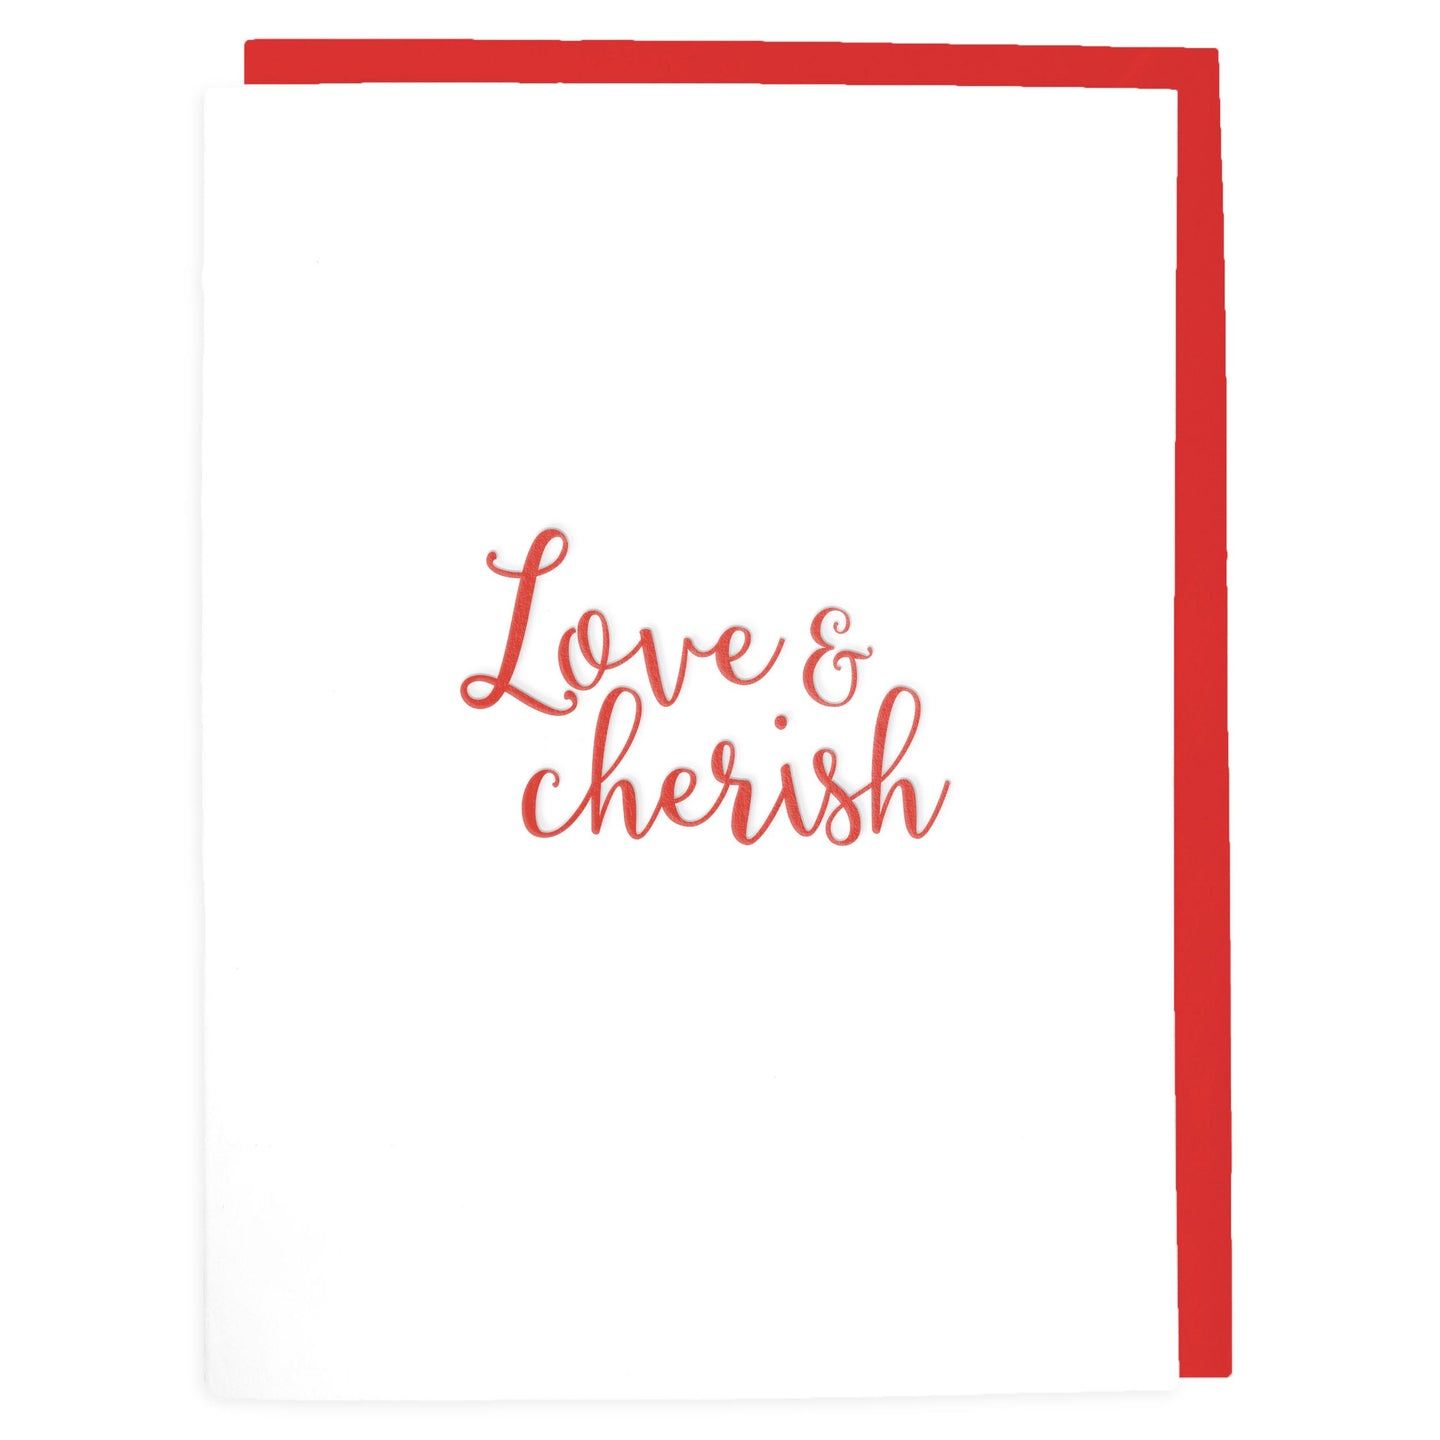 Love and Cherish Card - Letterpress Greeting Card - Tea and Becky